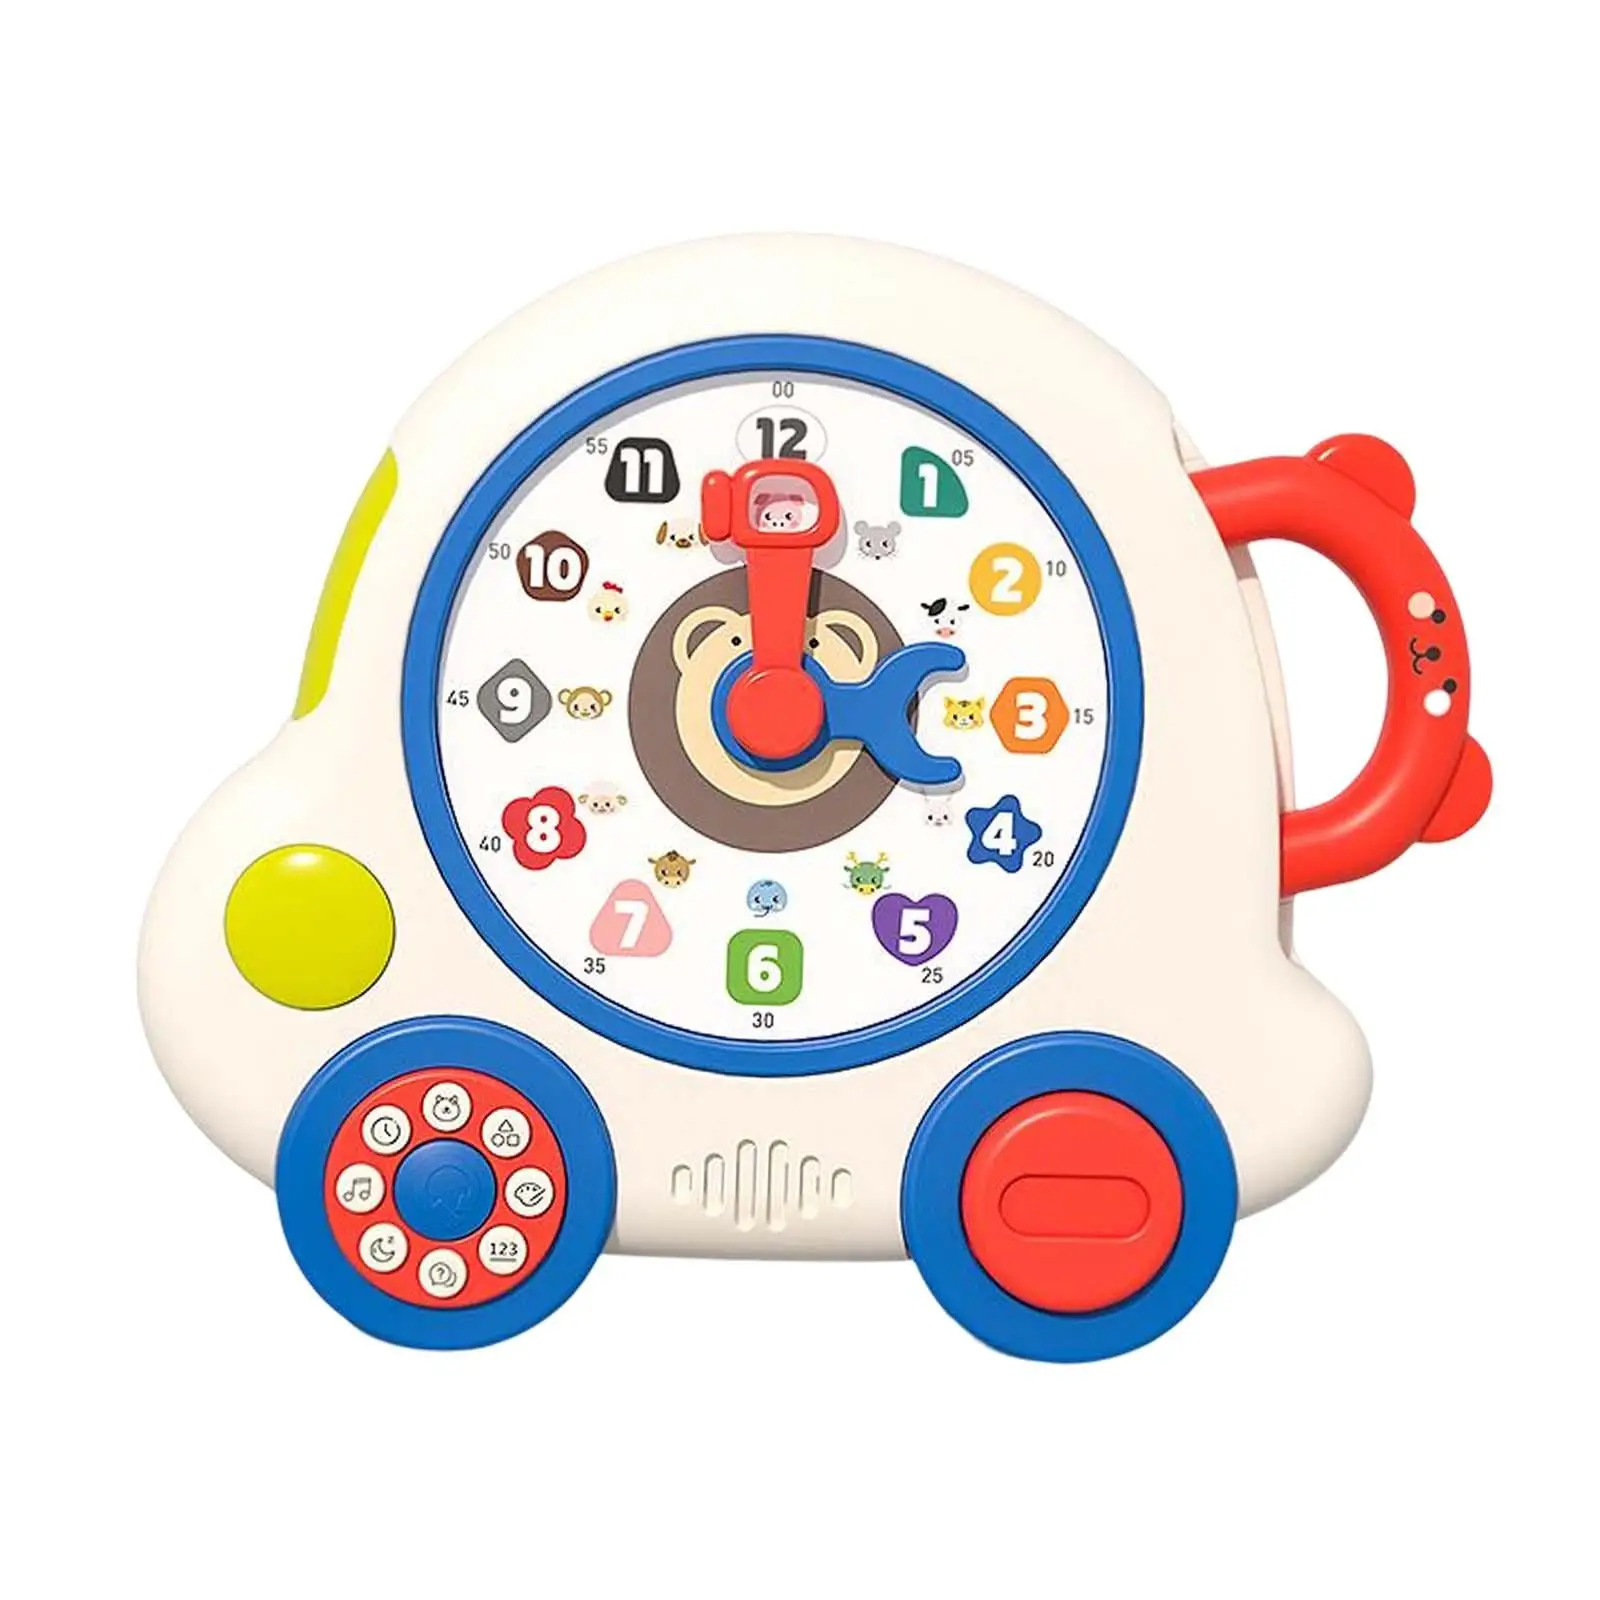 Kids Learning Machine Educational Portable for Preschool Babies 18 Month+